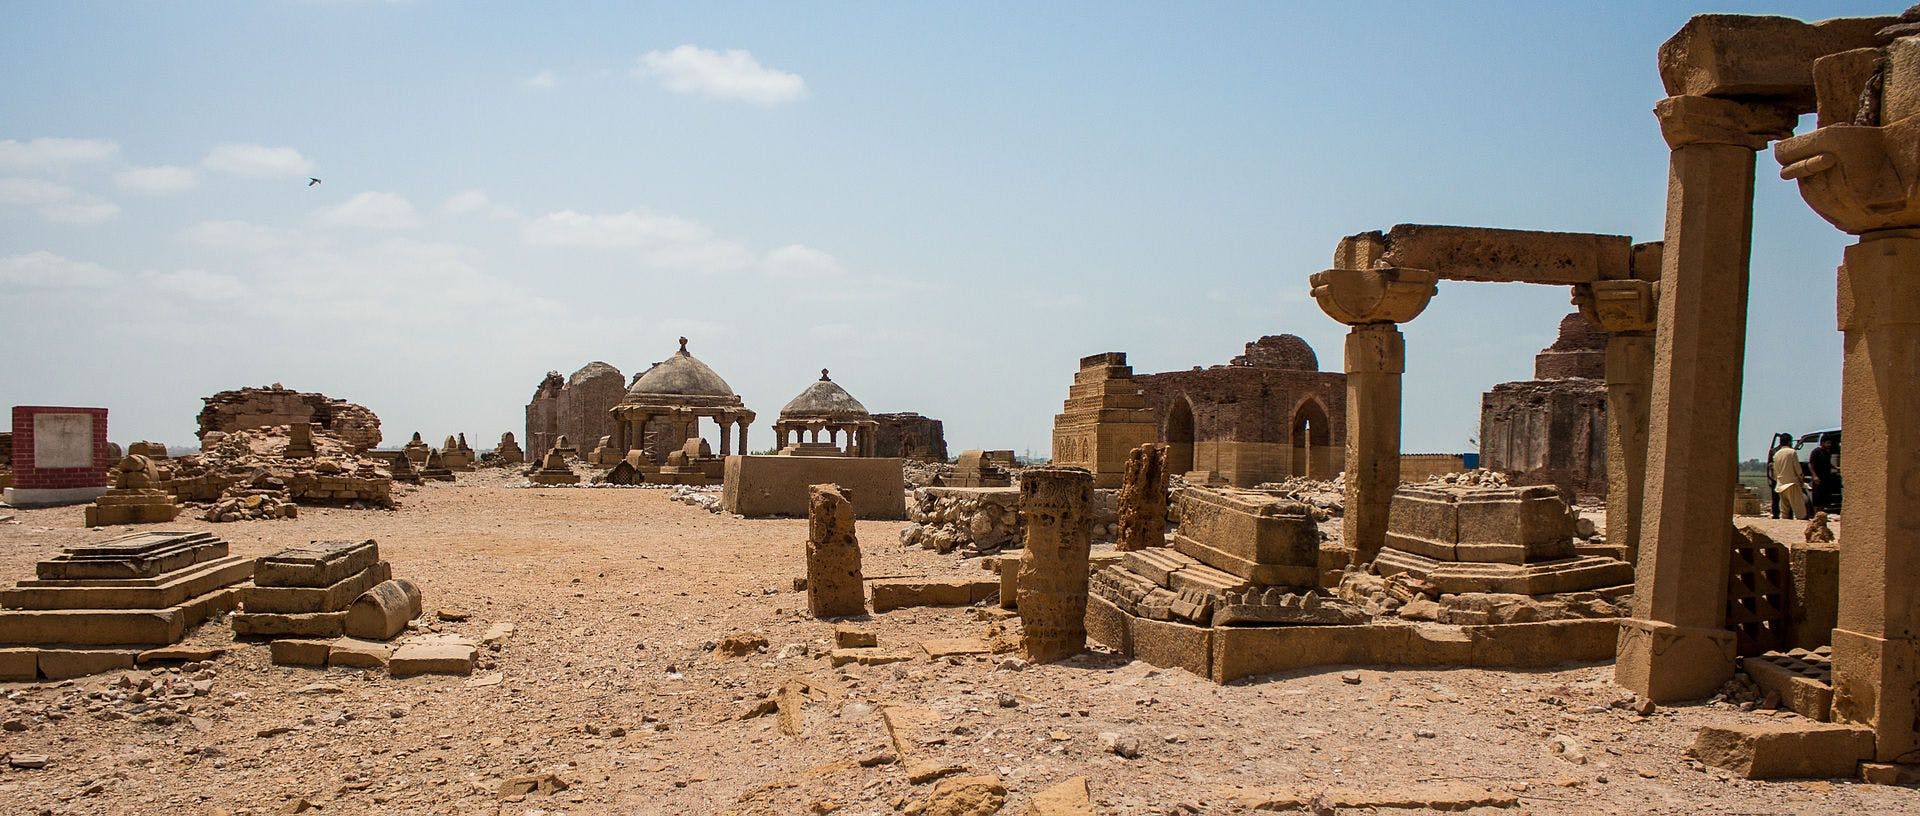 Ruins of structures in Thatta